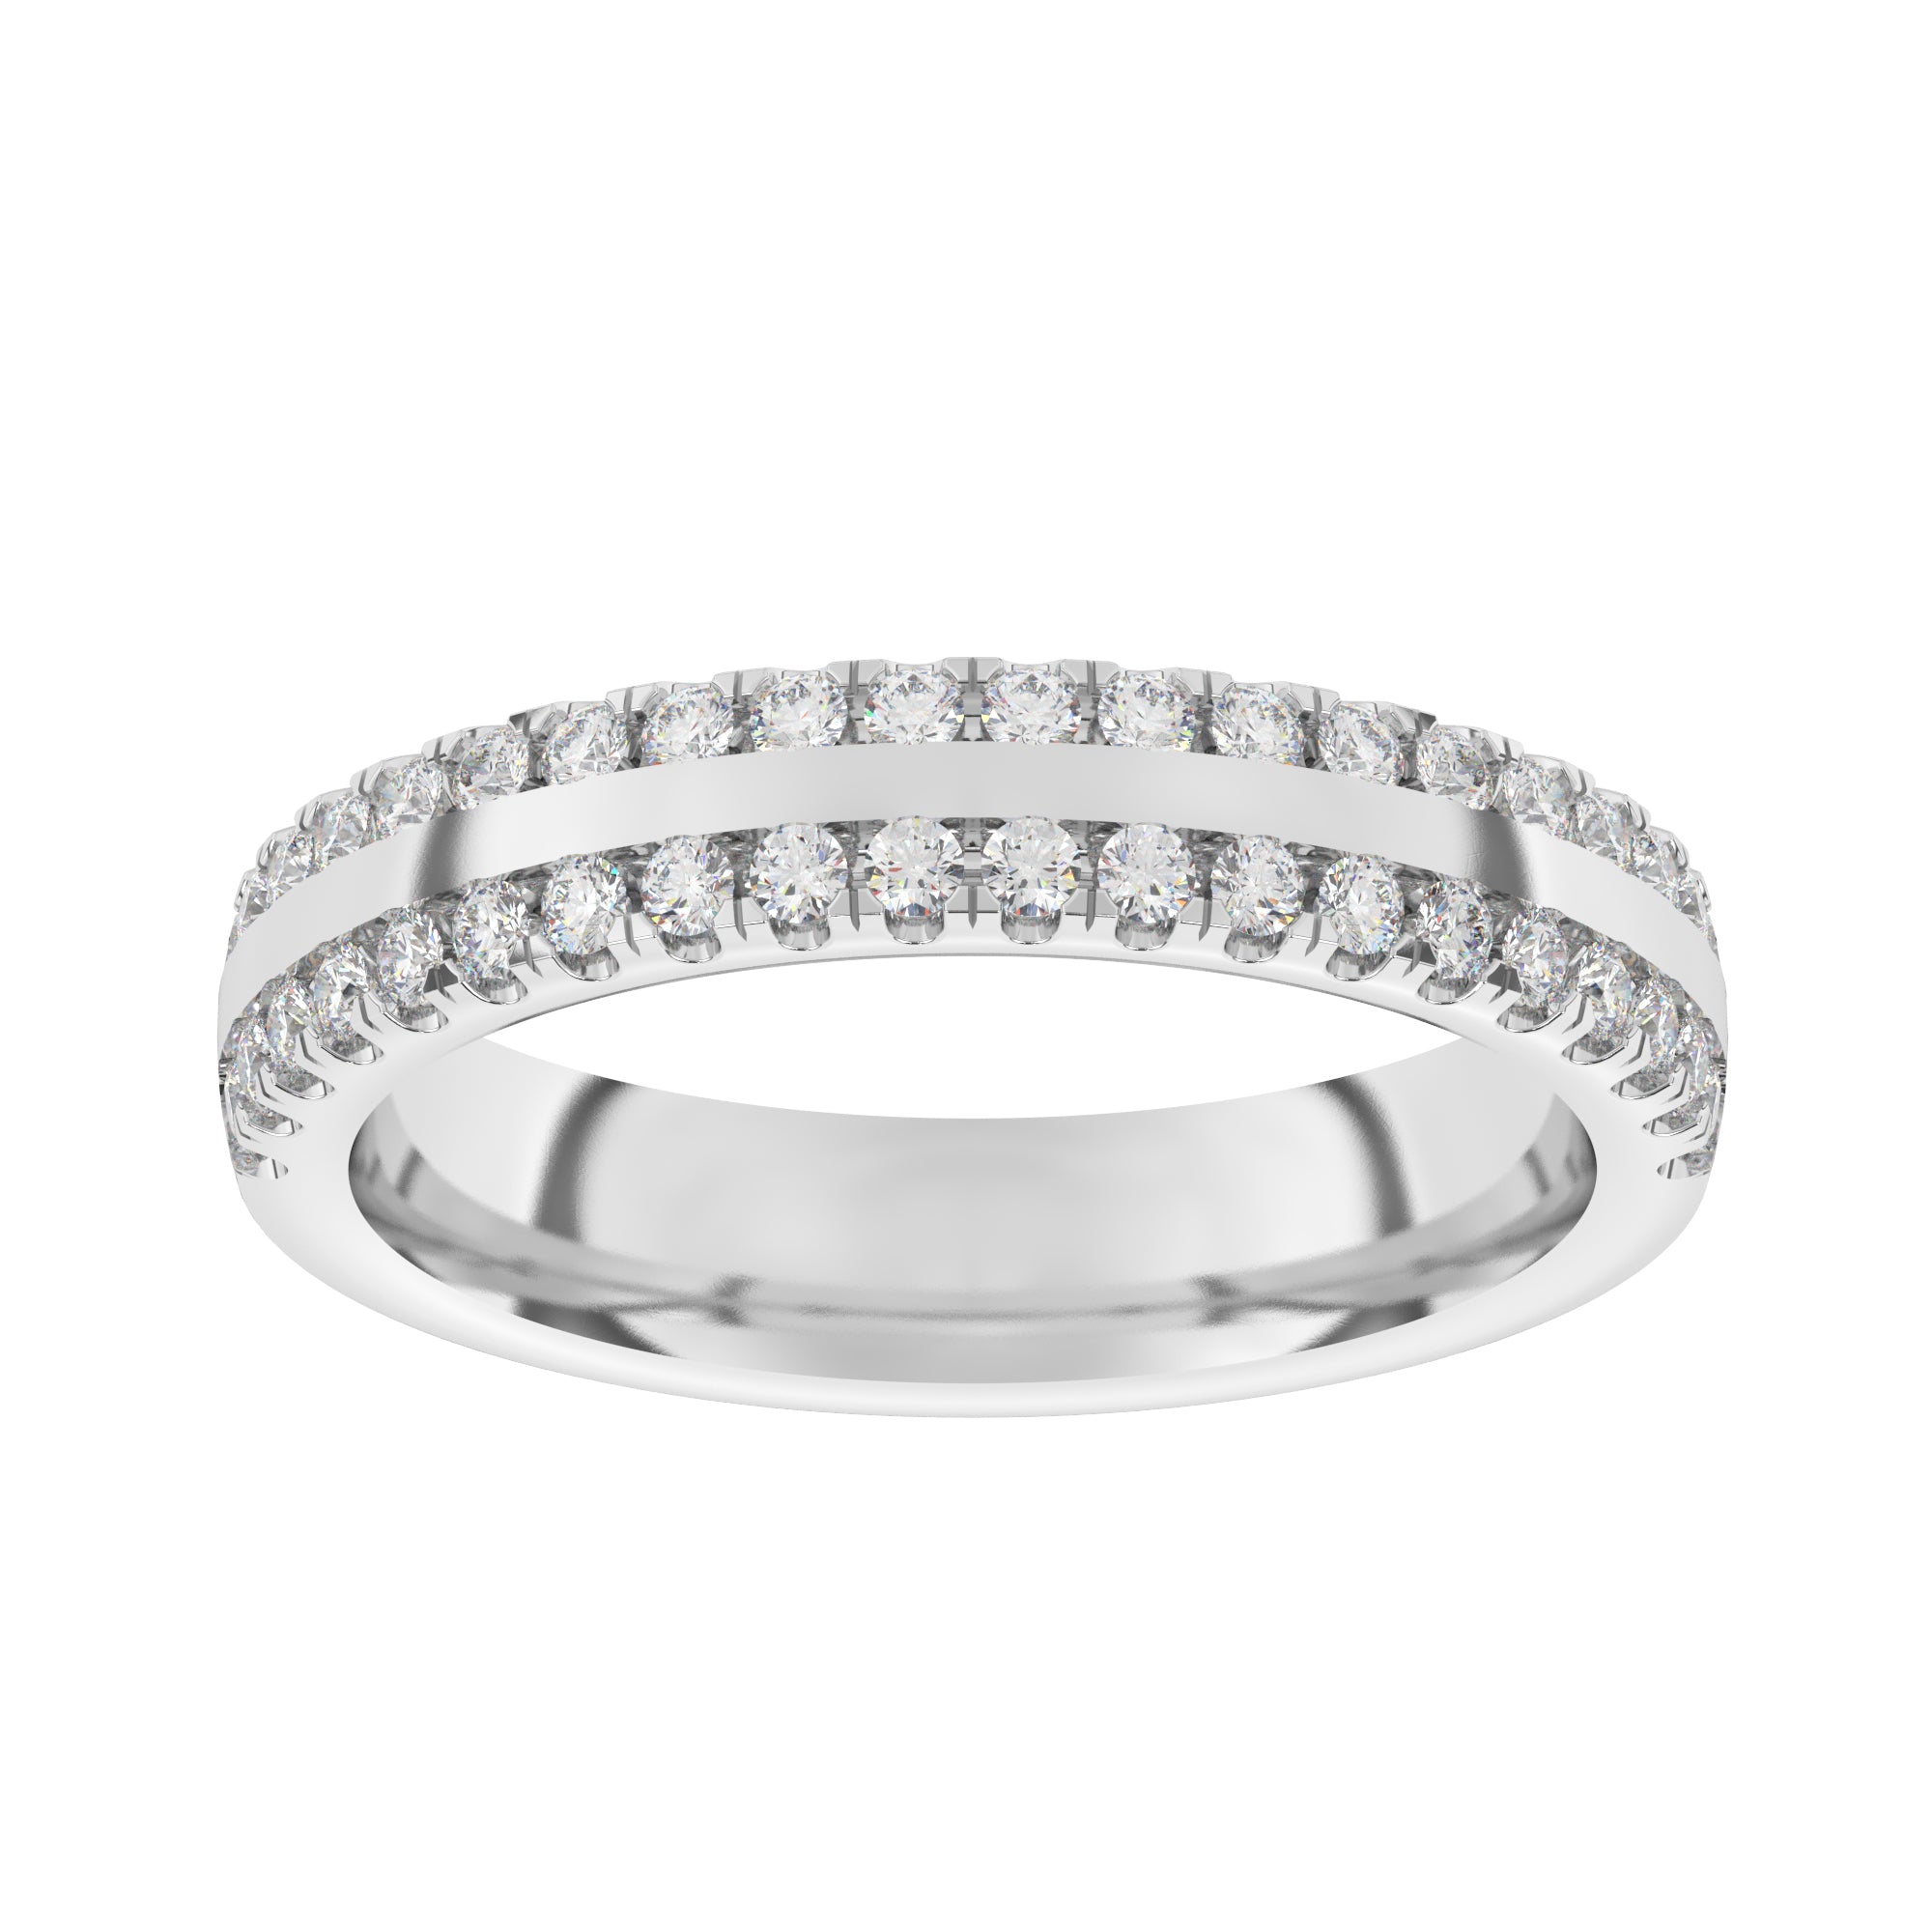 Double Row Diamond Half Eternity Ring with 0.55ct Round Brilliant  Cut Diamonds Set in a Double Channel